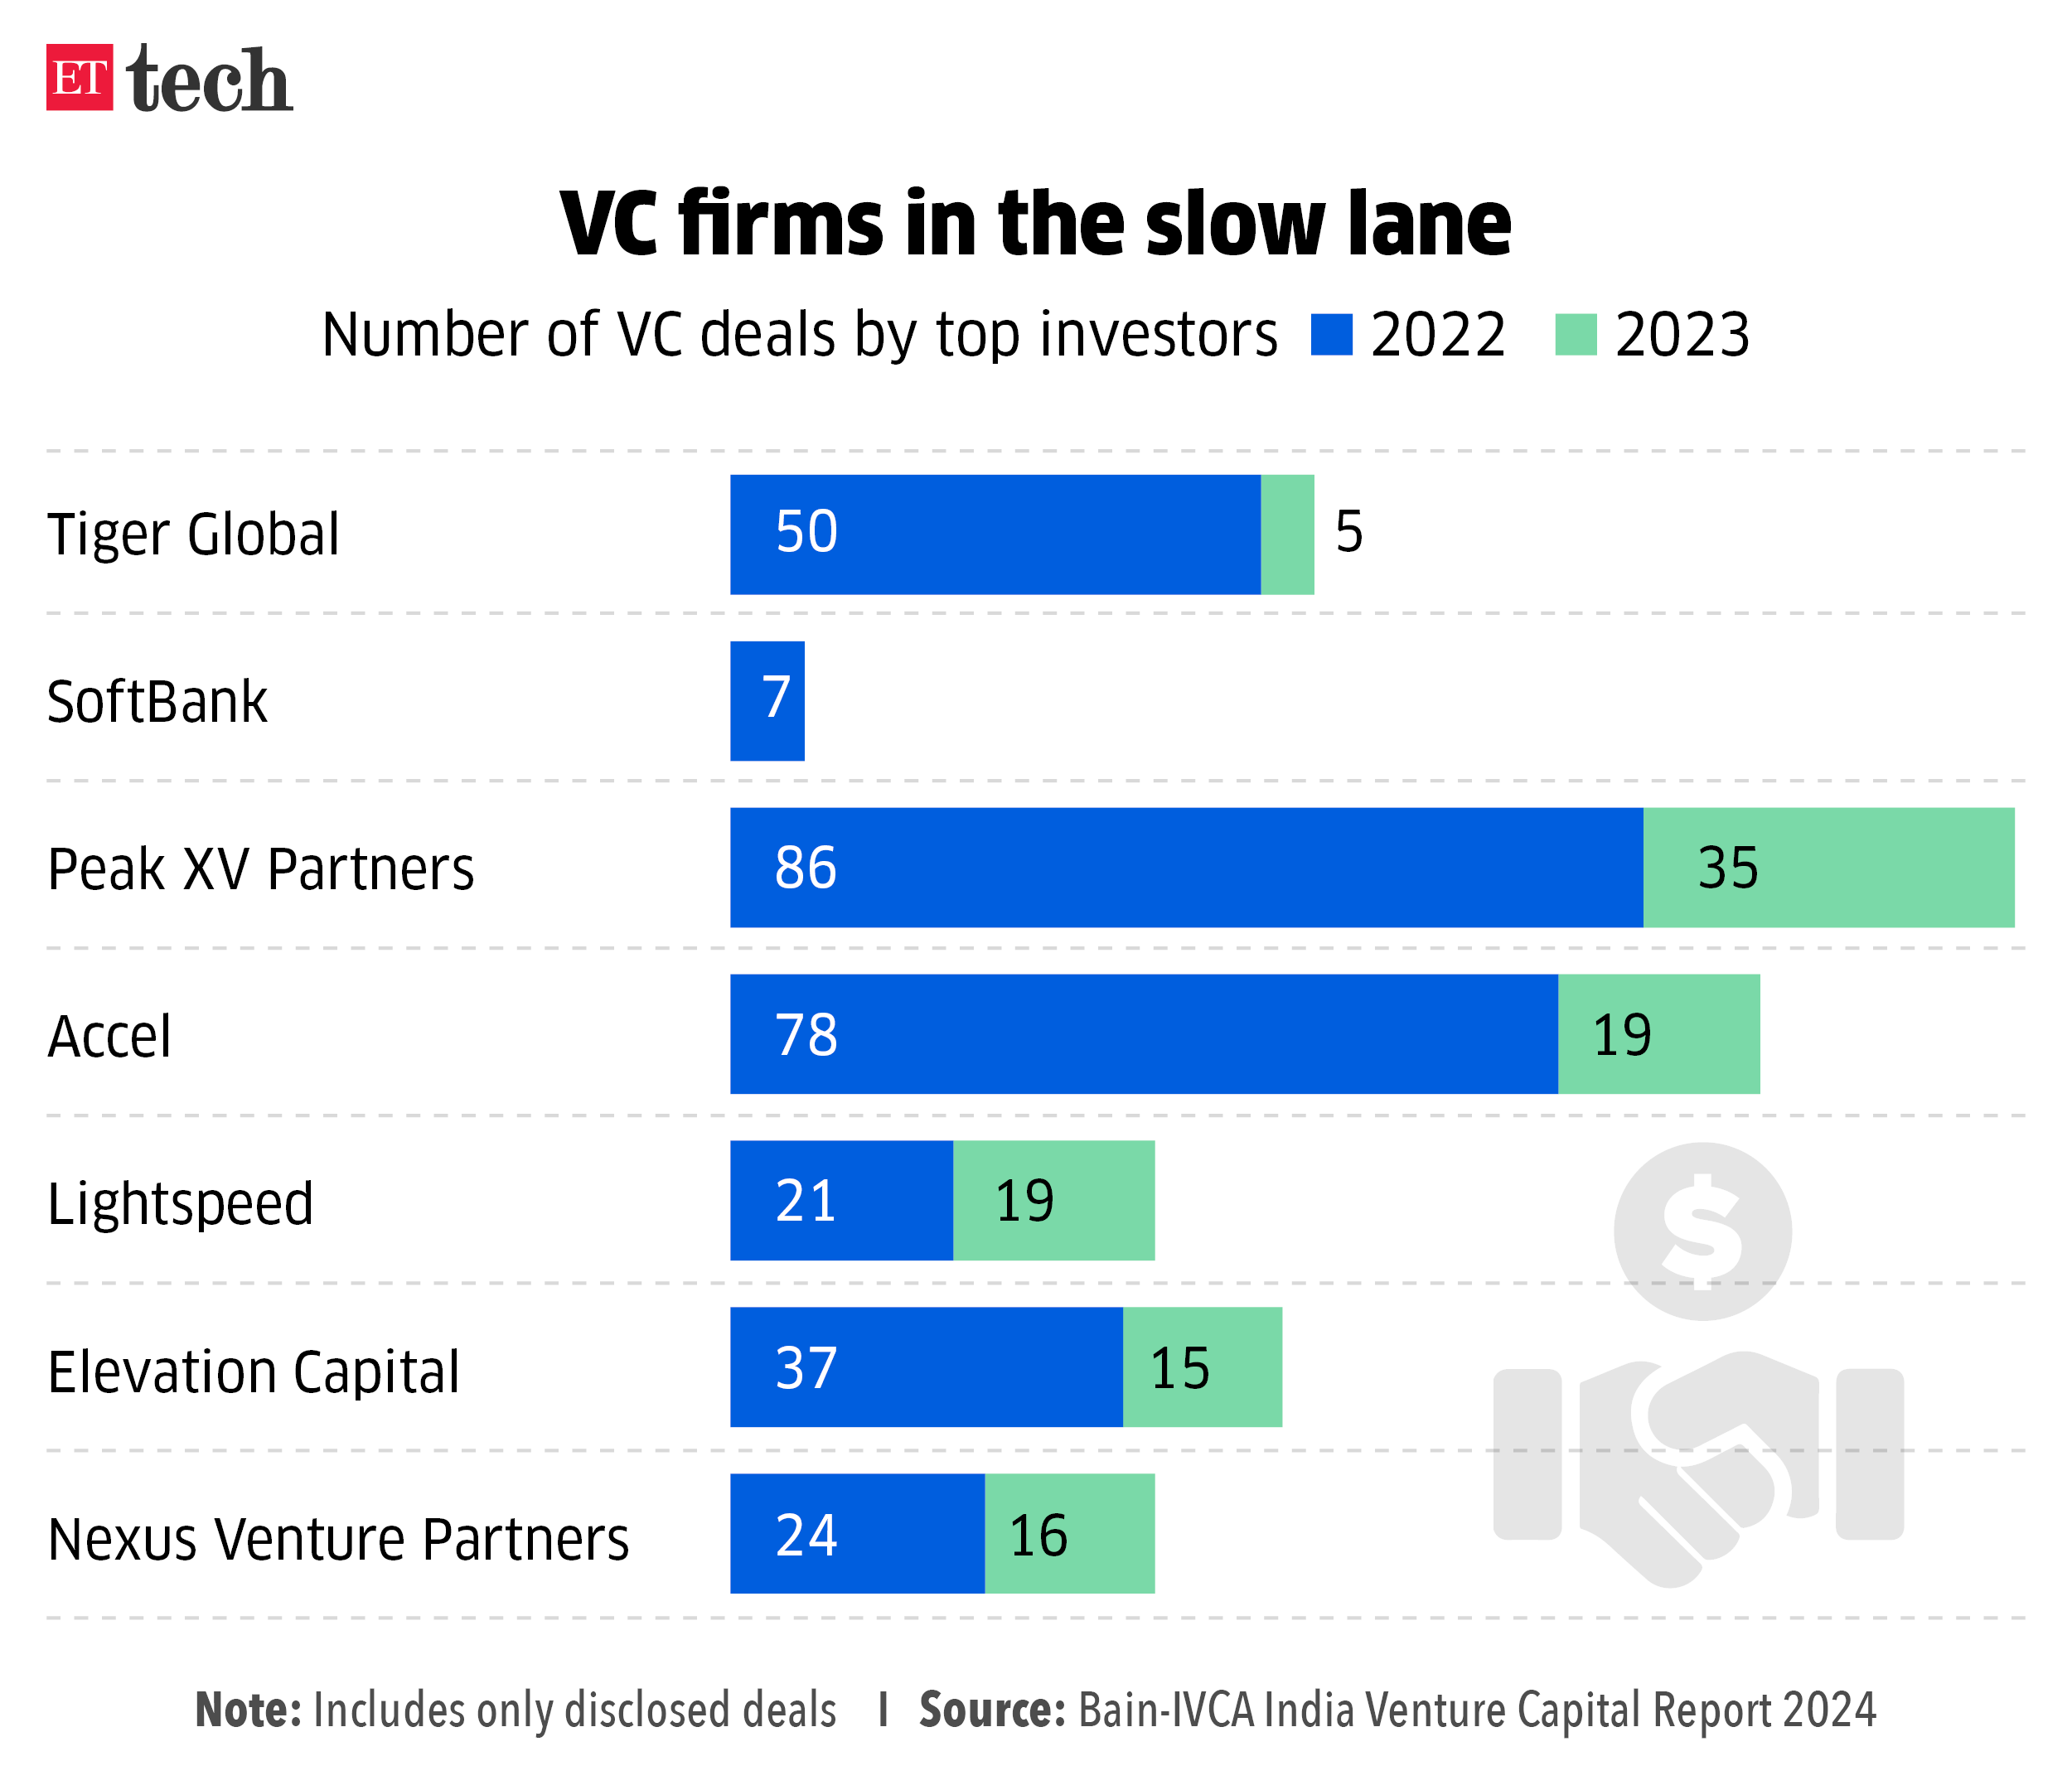 VC firms in the slow lane